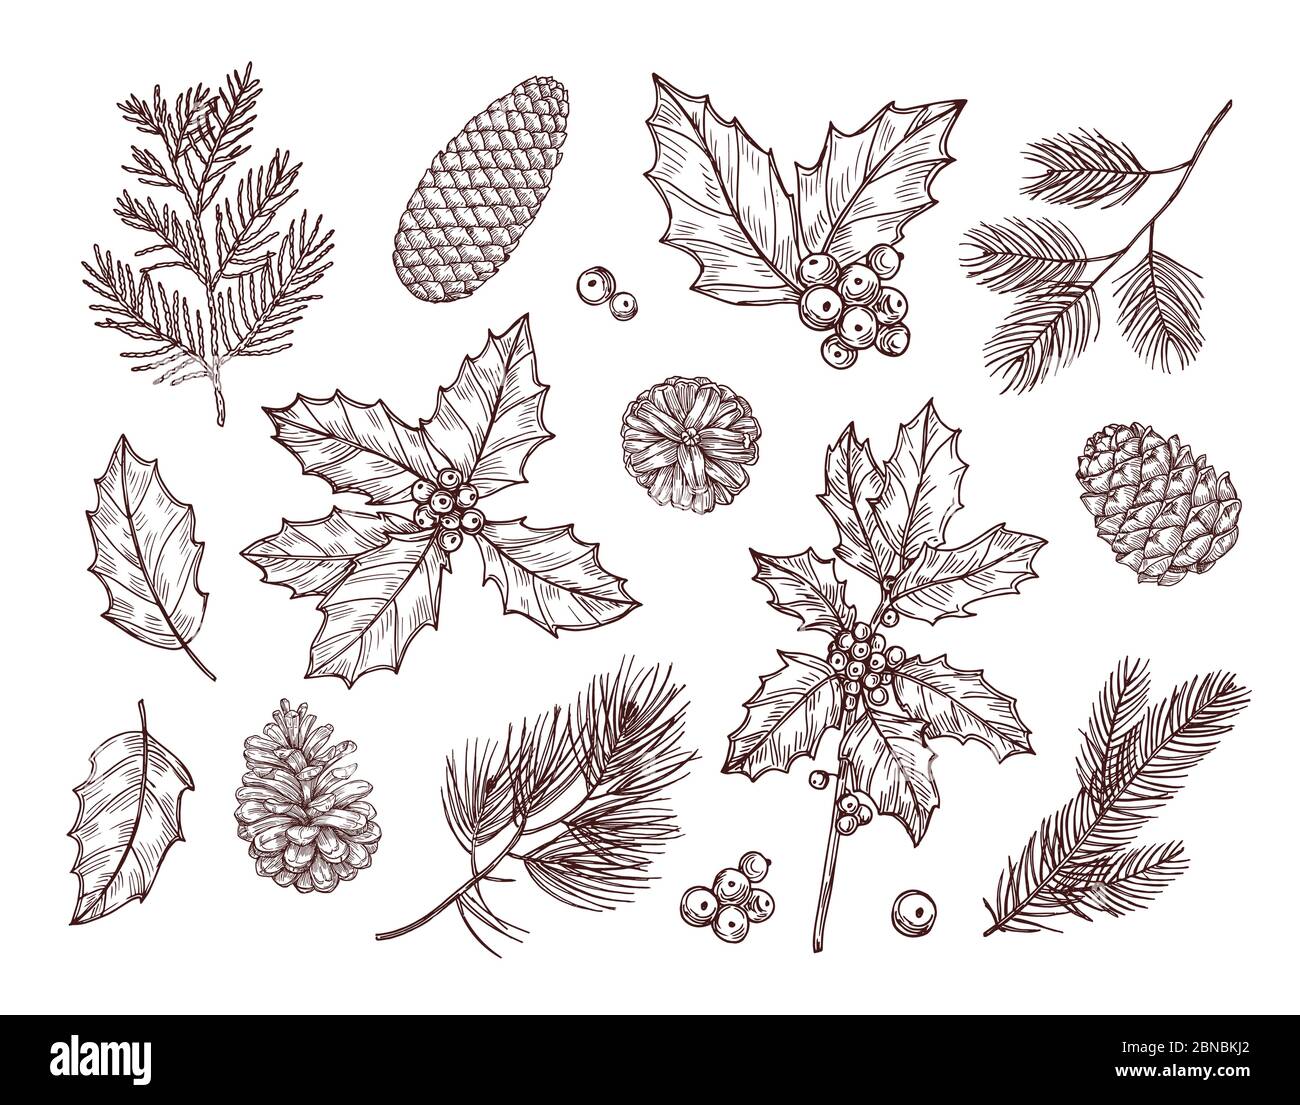 Christmas plants. Sketch fir branches, pine cones and holly leaves with berries. Christmas winter botanical vintage hand drawn set. Branch with pine sketch, decoration tree illustration Stock Vector